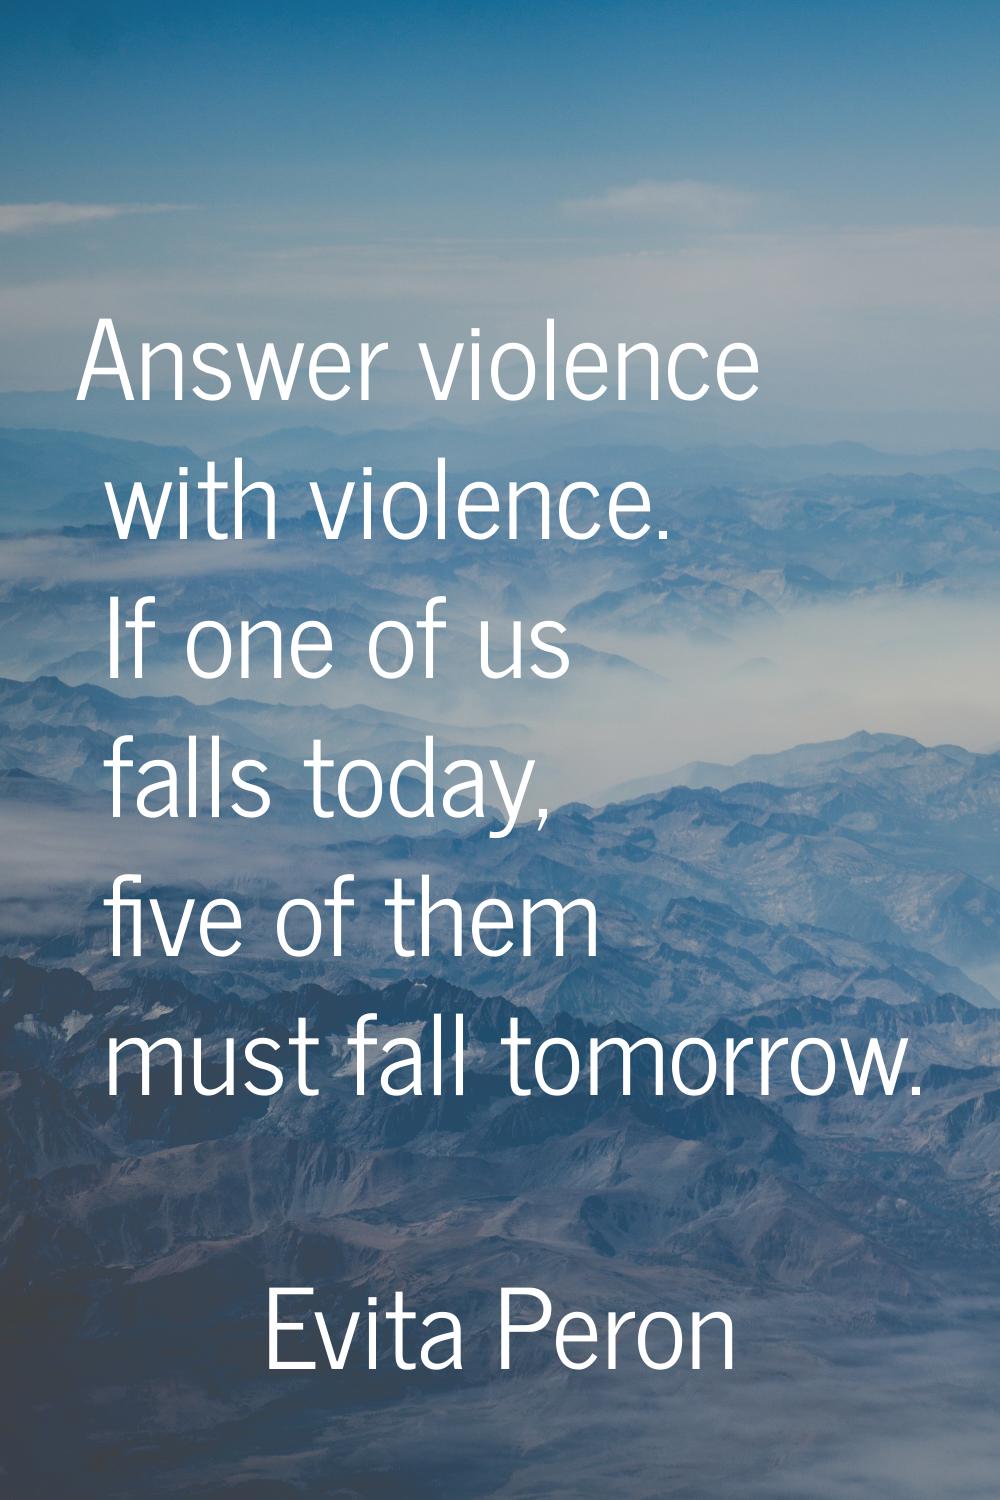 Answer violence with violence. If one of us falls today, five of them must fall tomorrow.